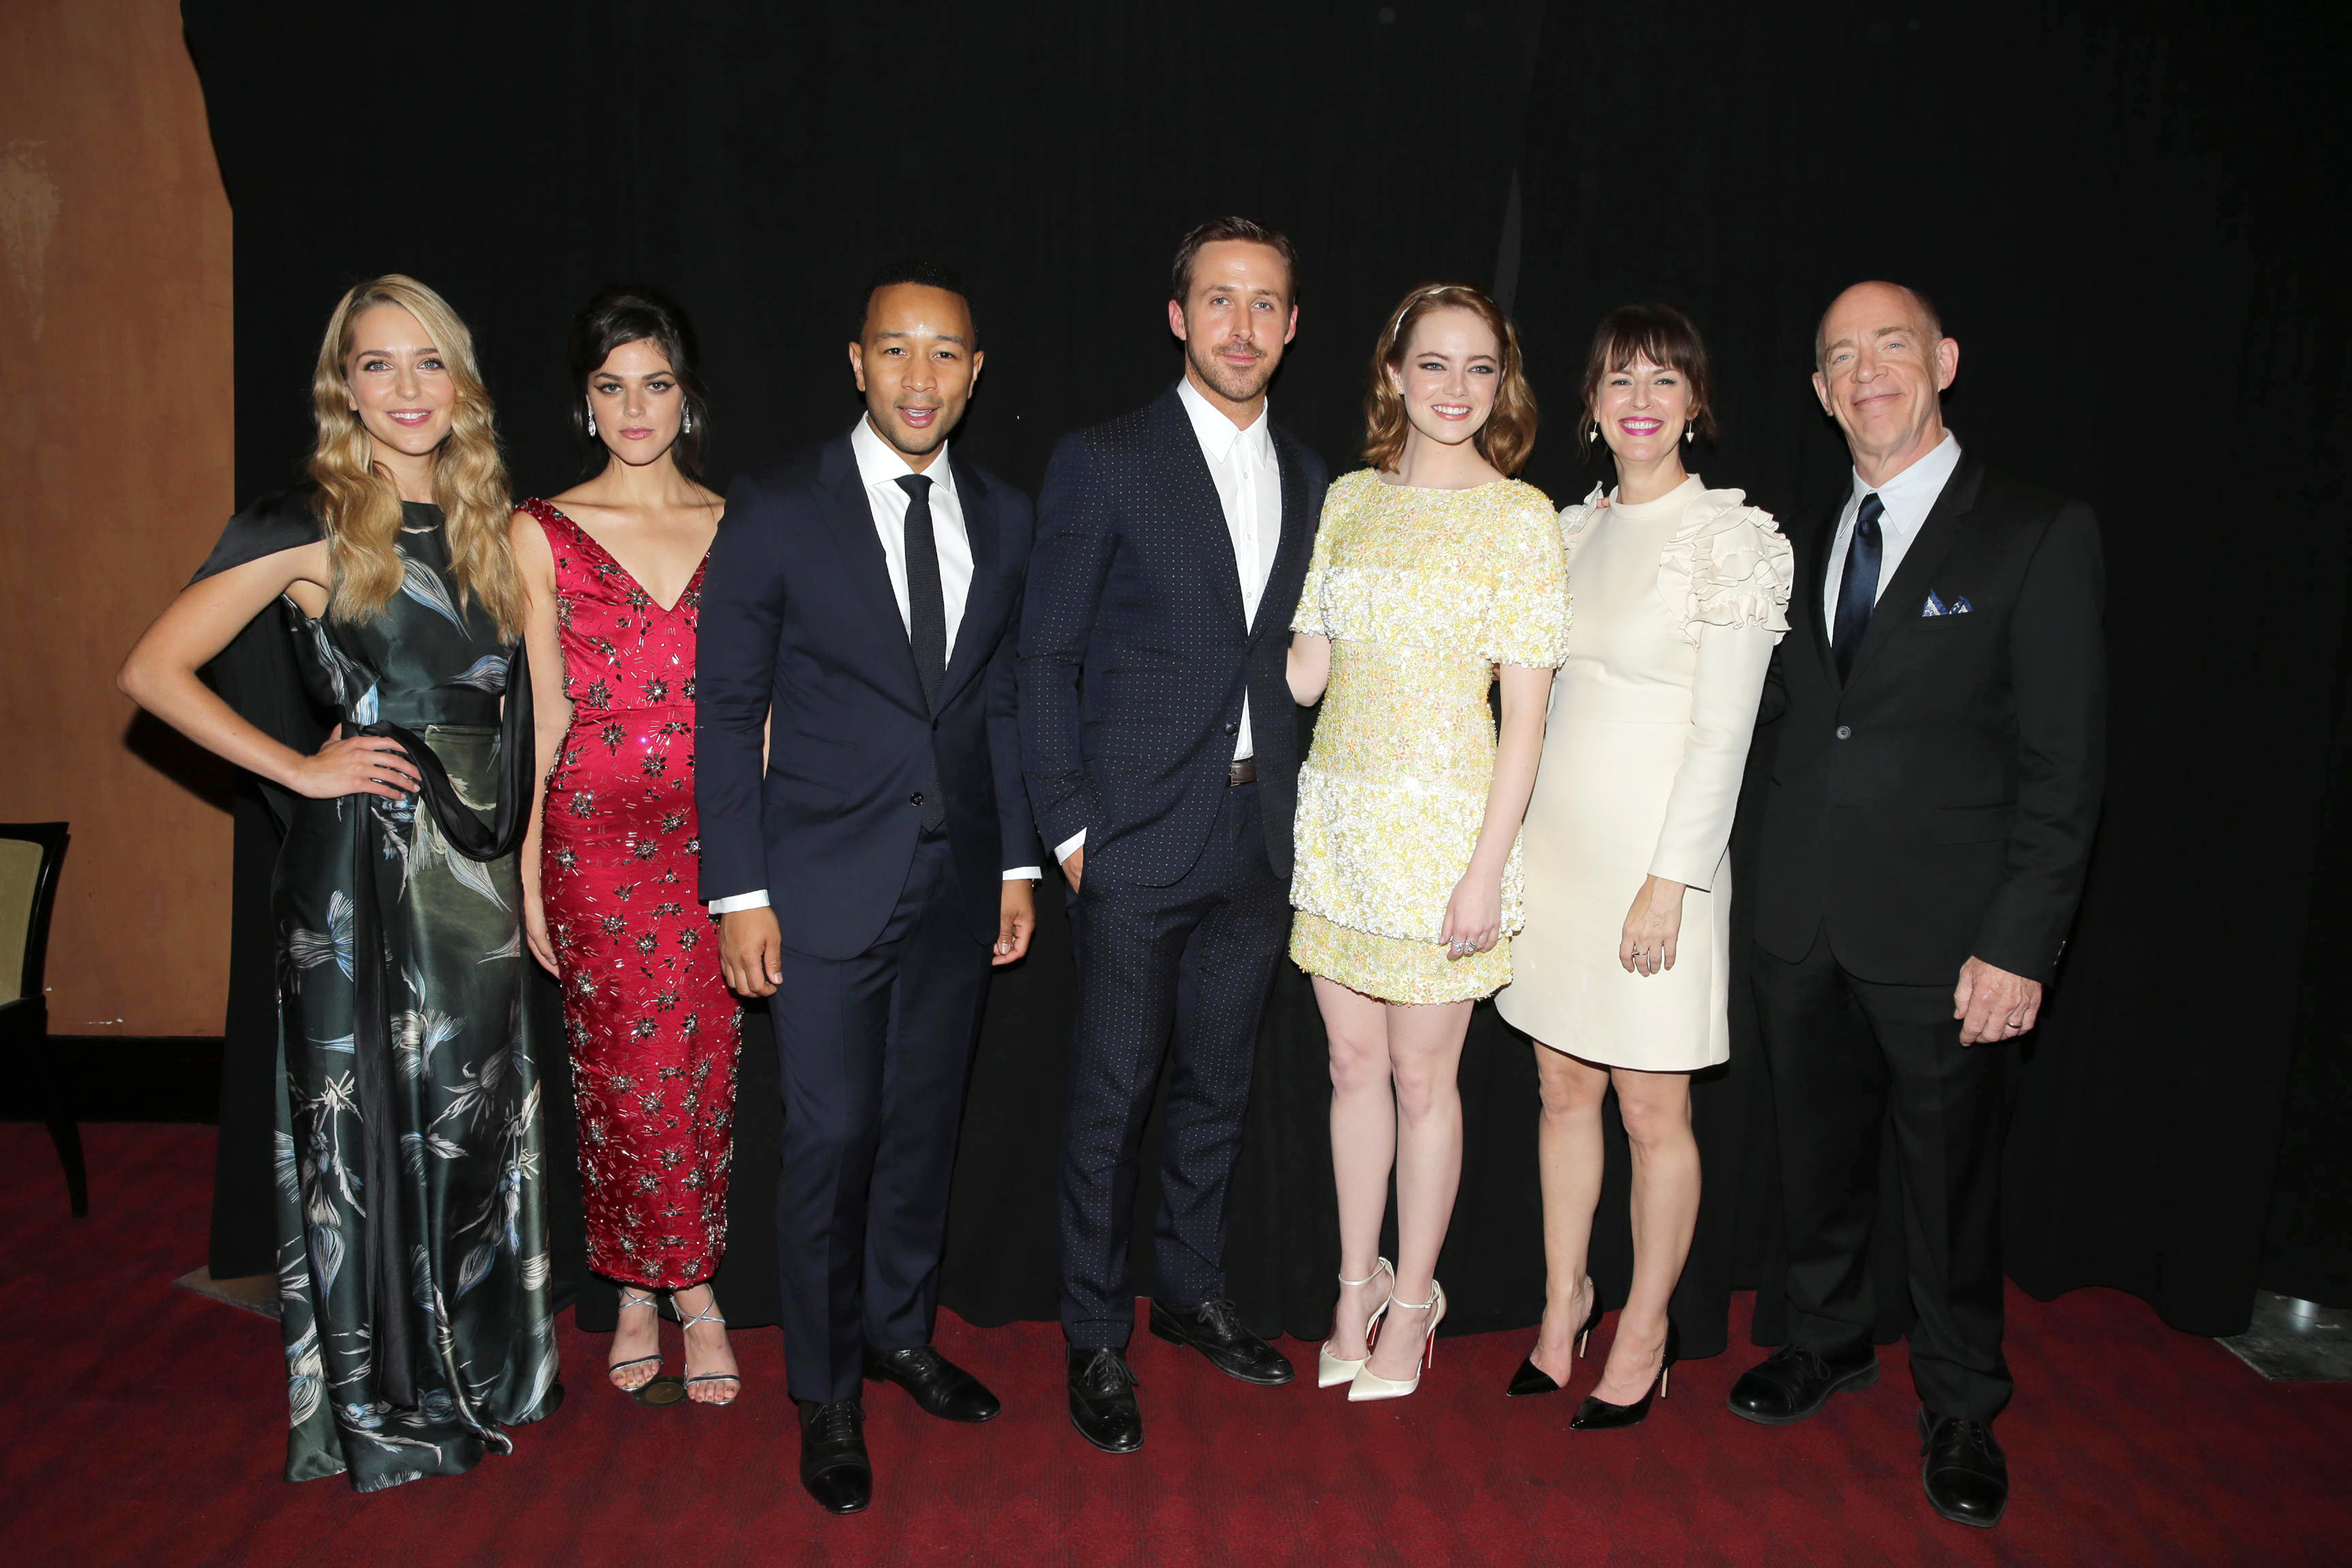 Jessica Rothe, Callie Hernandez, John Legend, Ryan Gosling, Emma Stone, Rosemarie DeWitt and J.K. Simmons seen at Summit Entertainment's "La La Land" premiere at the 2016 Toronto International Film Festival on Monday, Sept. 12, 2016, in Toronto. (Photo by Eric Charbonneau/Invision for LionsgateAP Images)